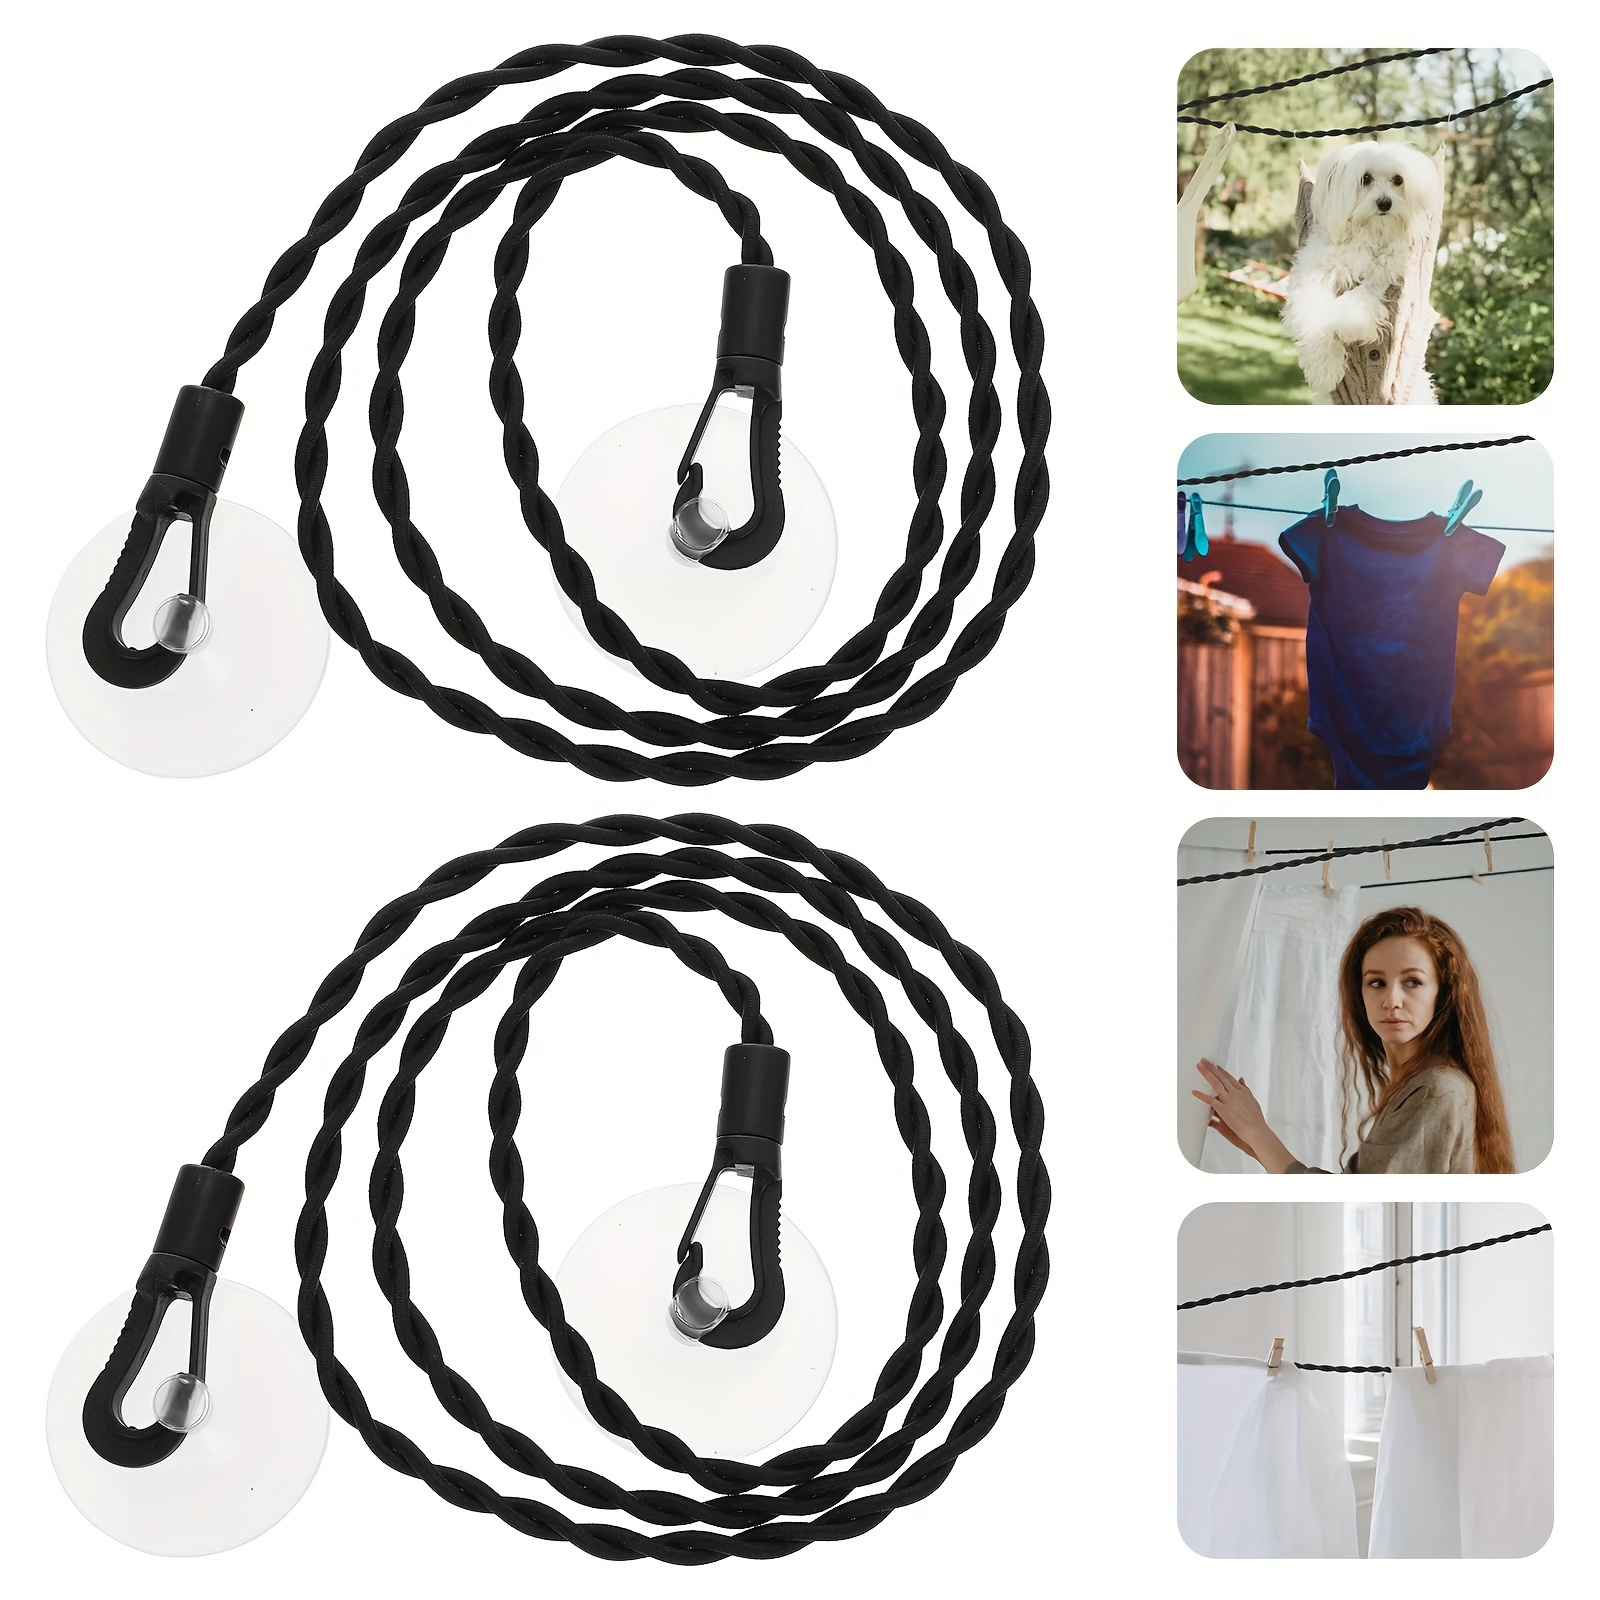 3m/5m/8m/10m Clothes Drying Rope Anti Slip Windproof Outdoor Travel Clothes  Hanging Rope for Garden Camping Accessories RV - AliExpress